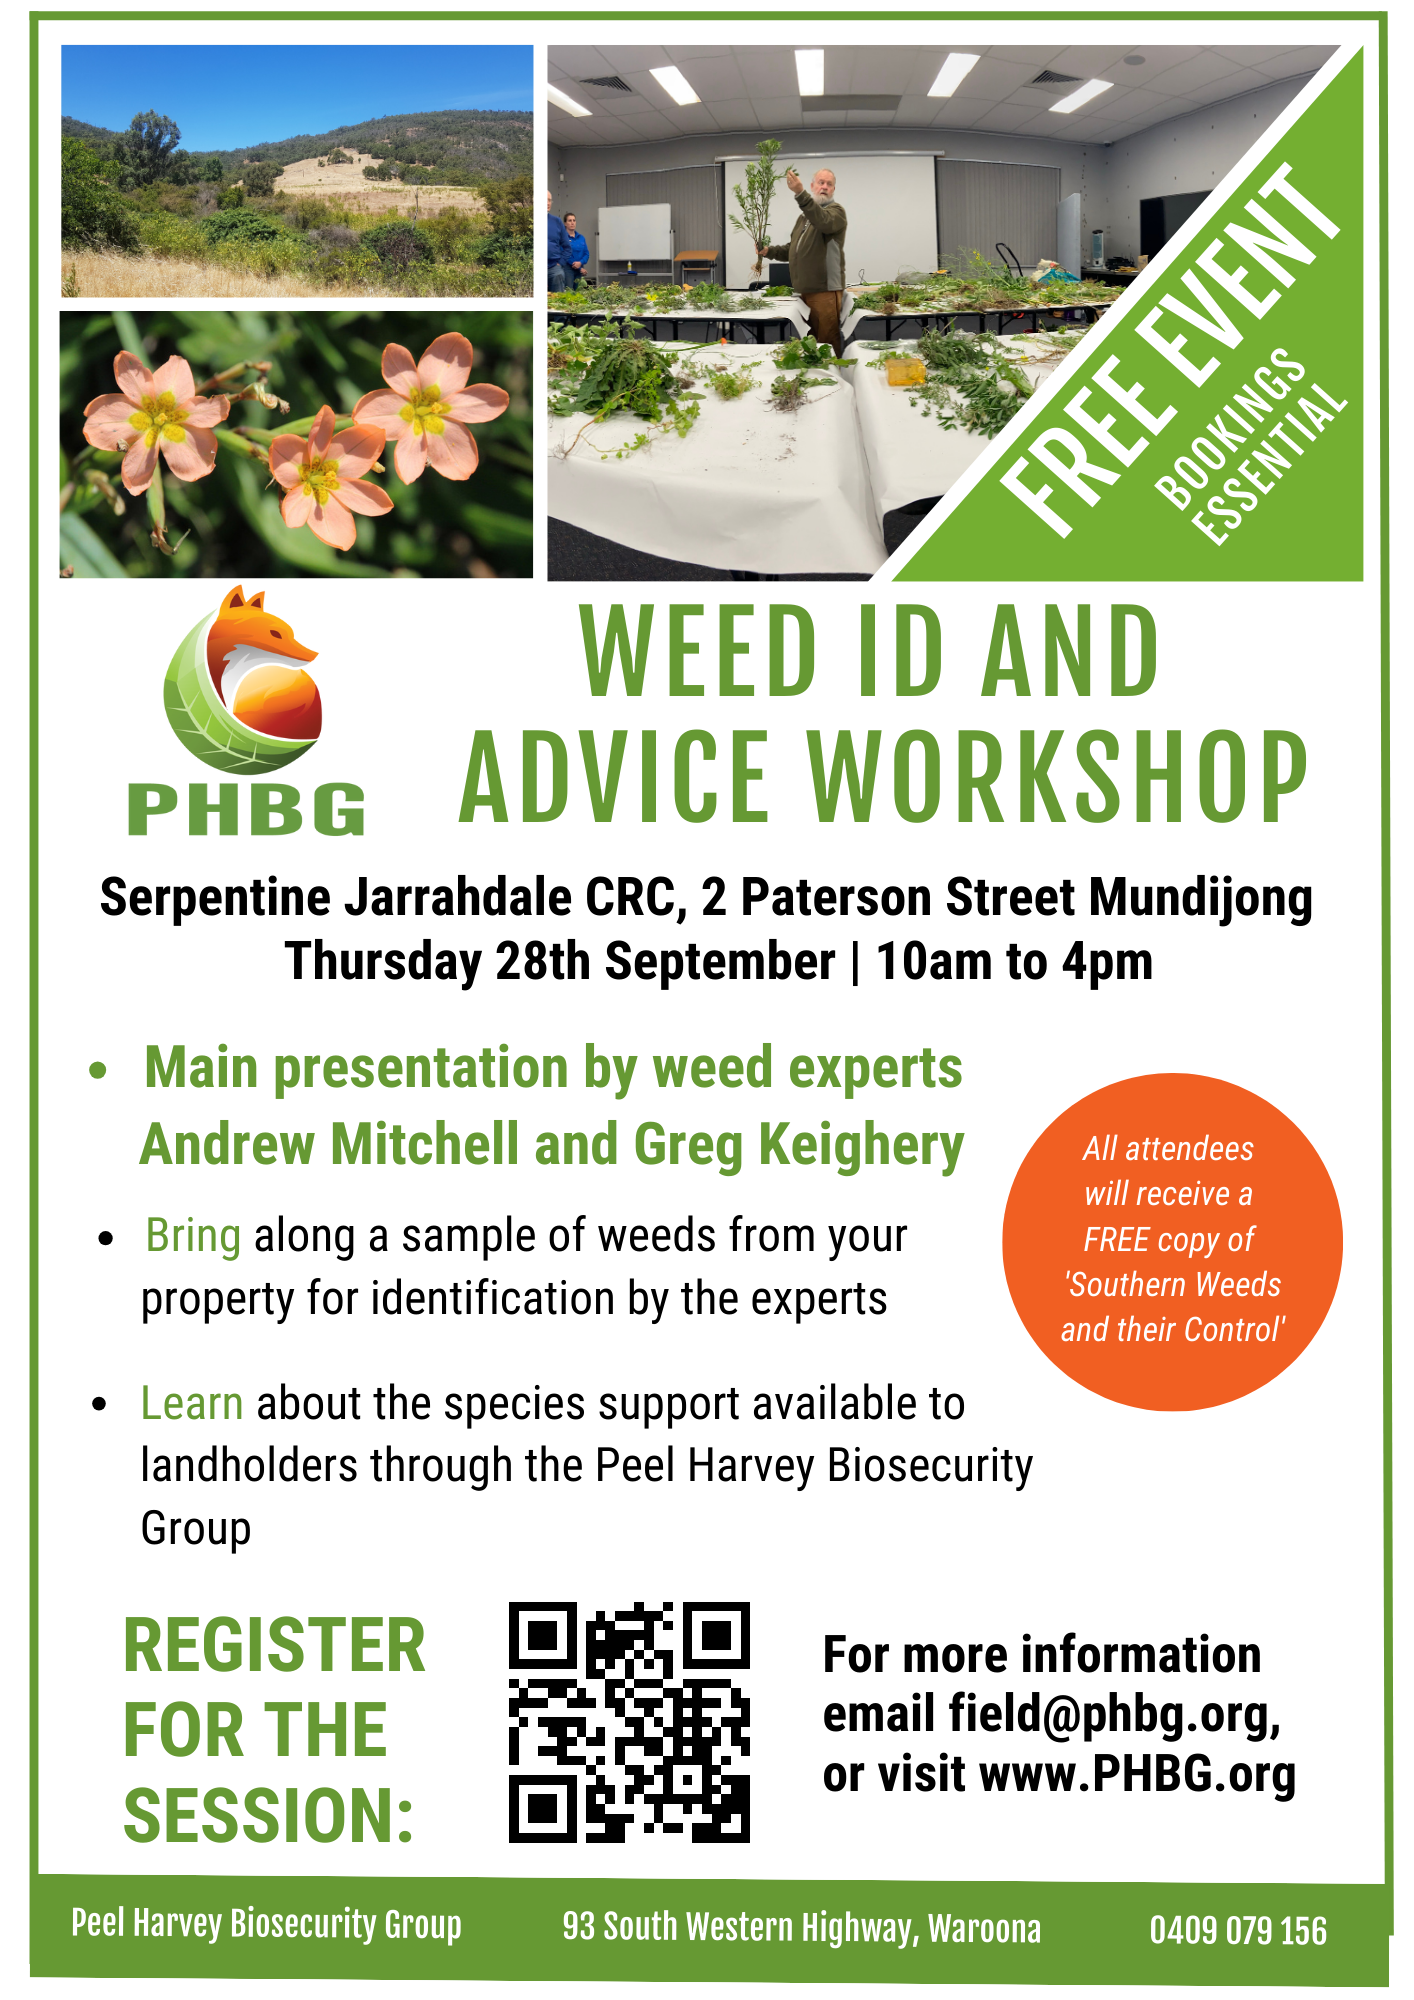 Weed ID and Advice Workshop